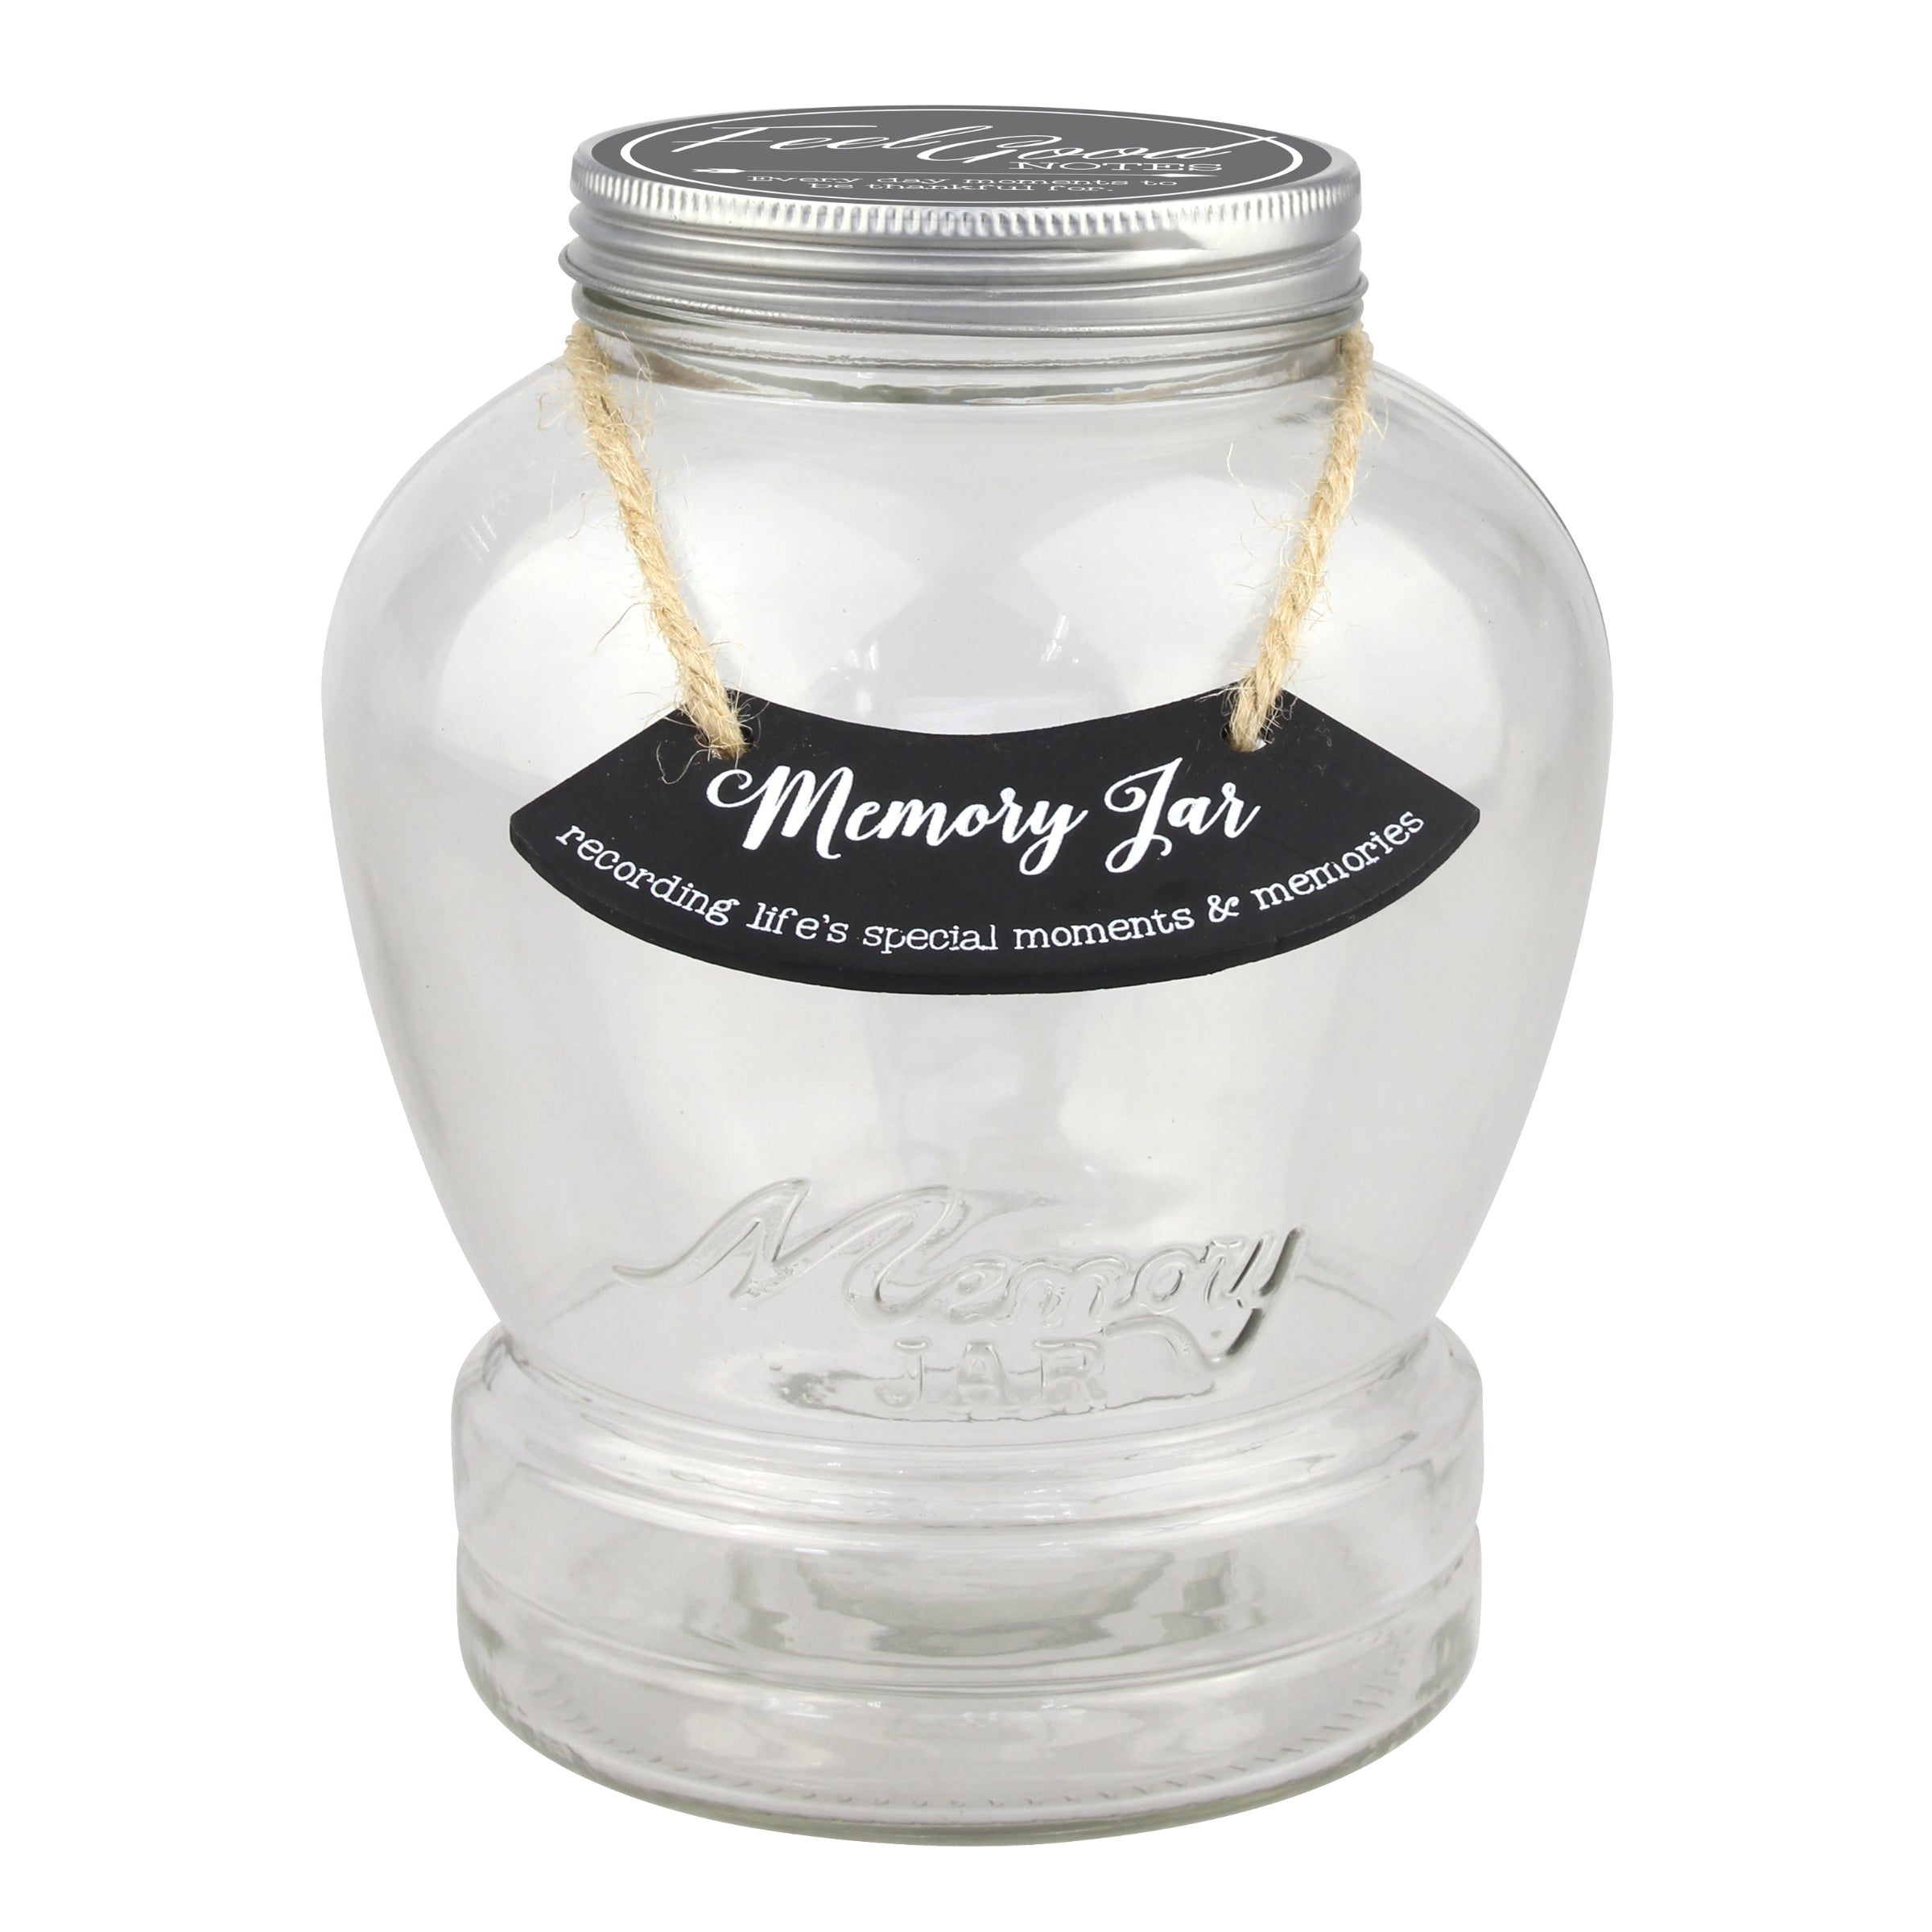 Top Shelf Feel Good Memory Jar With 180 Tickets, Pen, and Decorative Lid (WS)